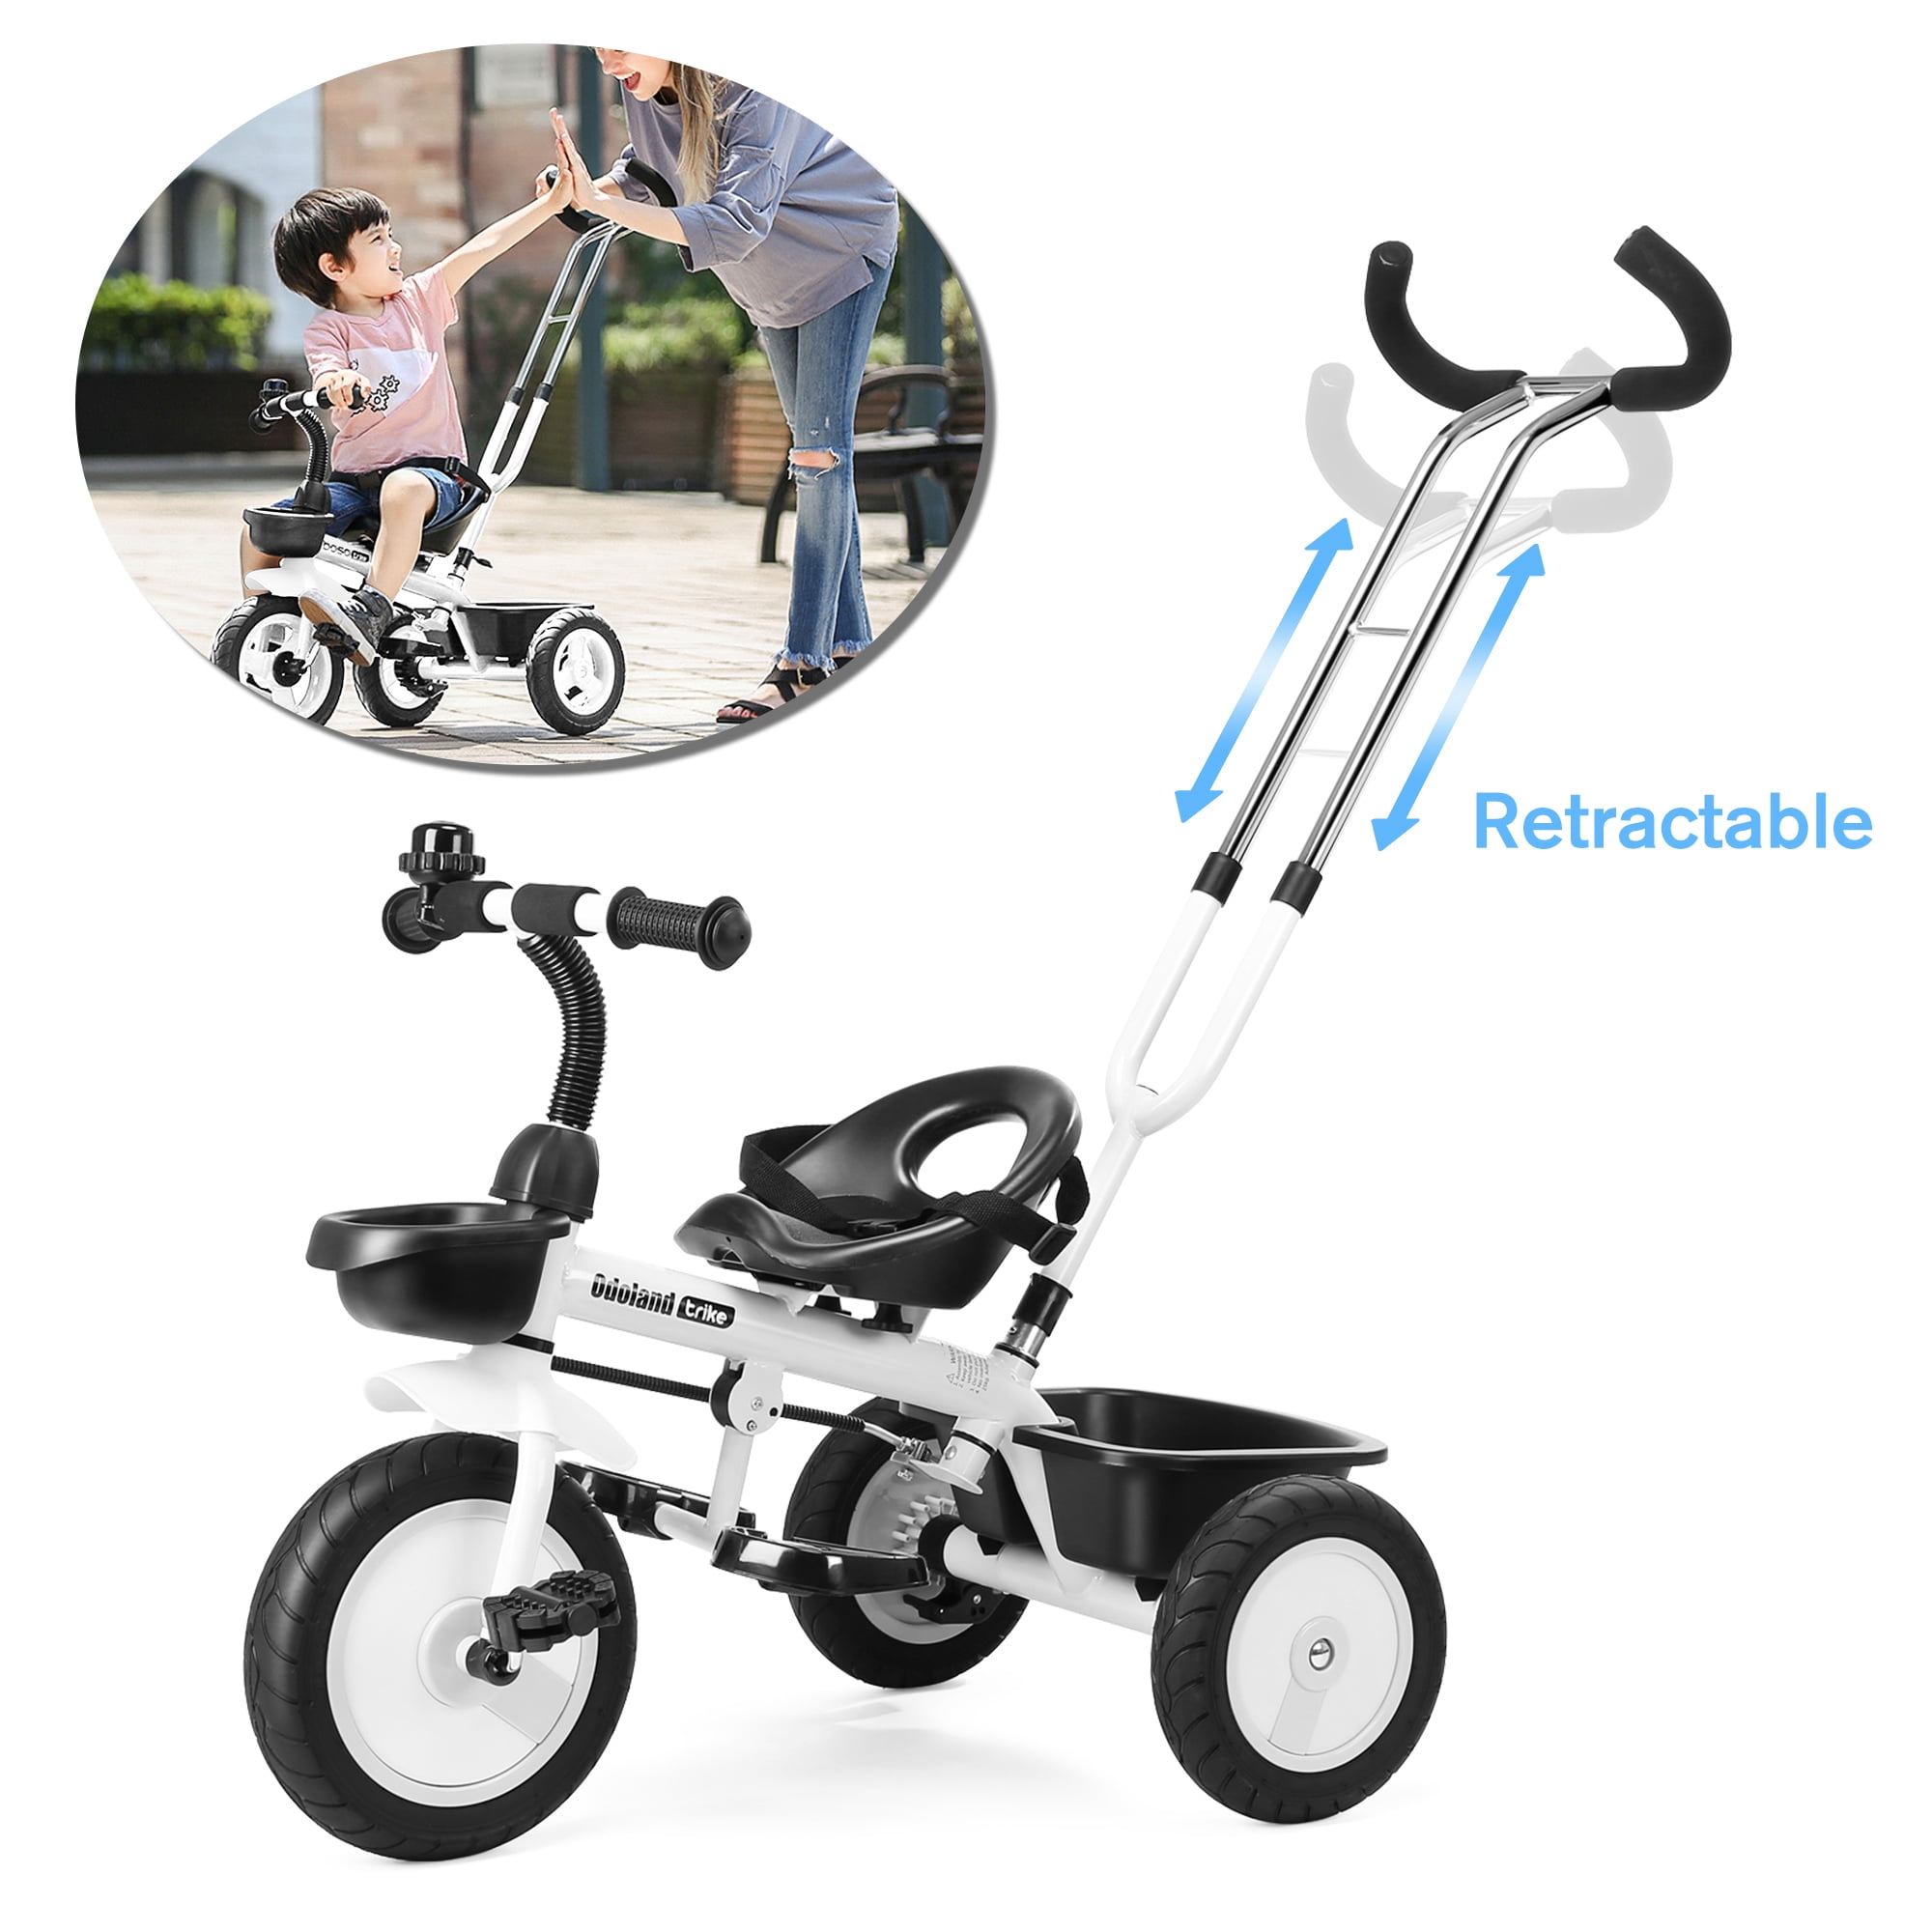 White COOL-Series Kids Trike Toddlers Children Tricycle Stroller Trike 3 Wheel Pedal Bike Multicolor for 2 3 4 5 6 Years Old Boys Girls Indoor & Outdoor with Storage Bin and Cup Holder 